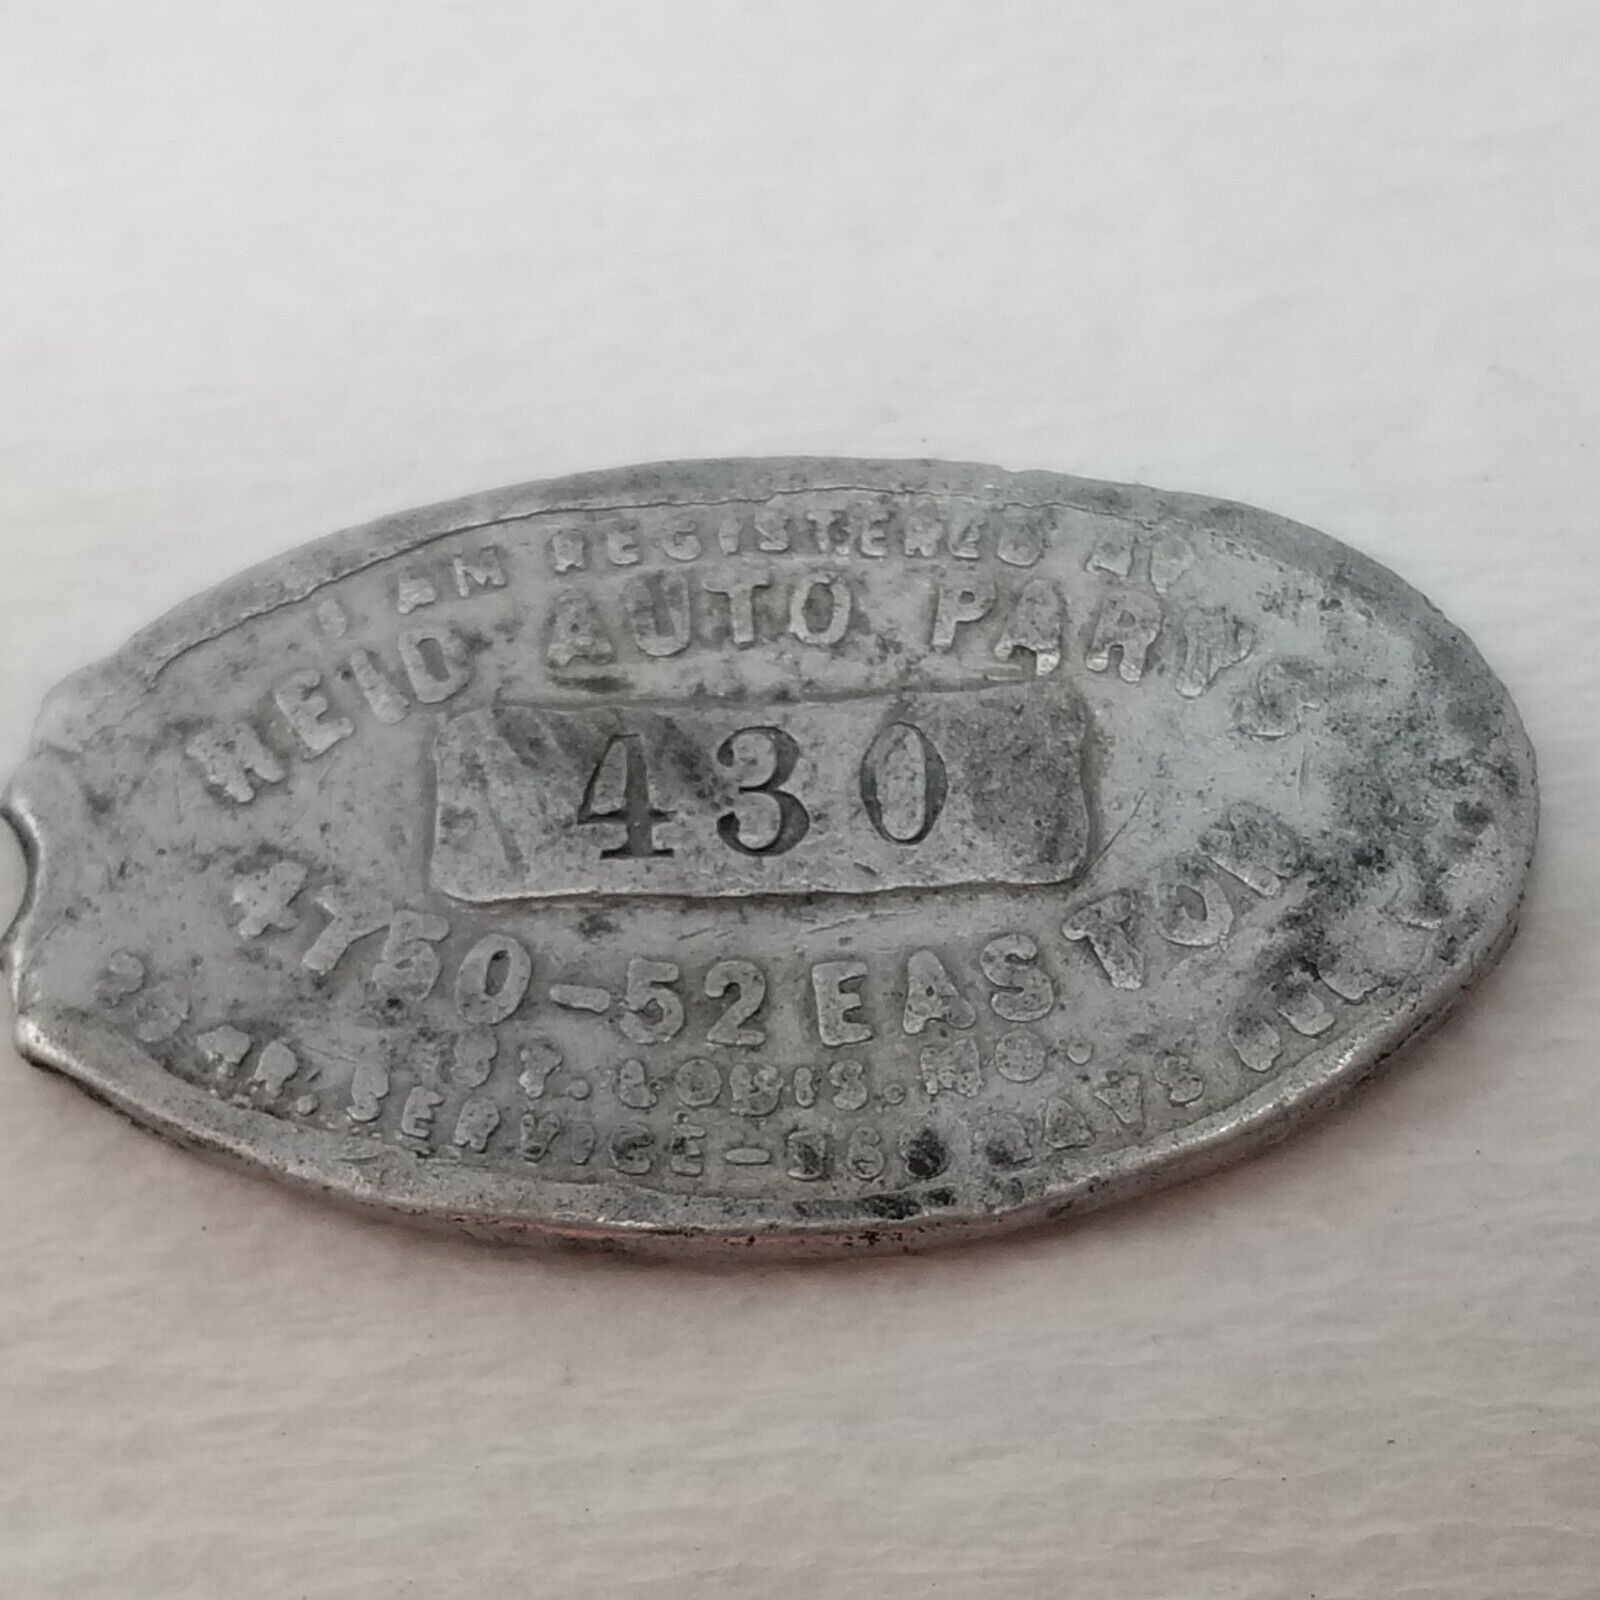 Primary image for Reid Auto Parts St. Louis Numbered Identification Tag Registration Antique